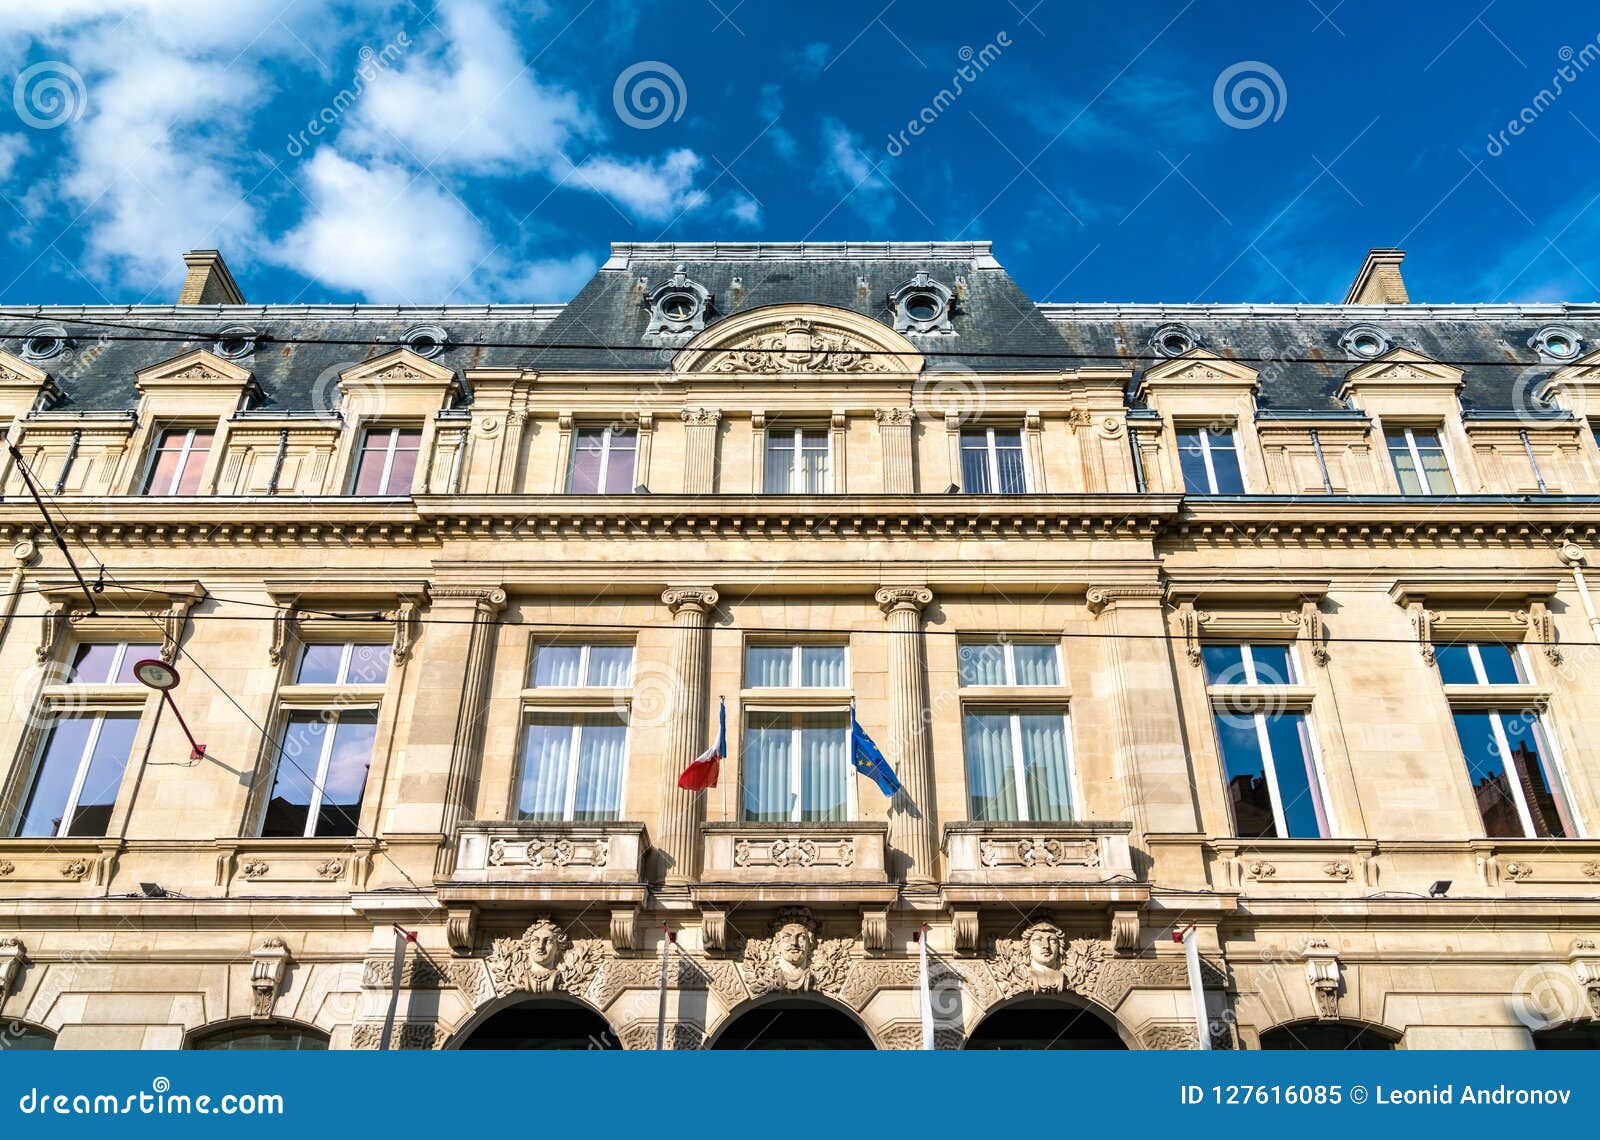 Buildings in the City Centre of Le Mans, France Stock Image - Image of